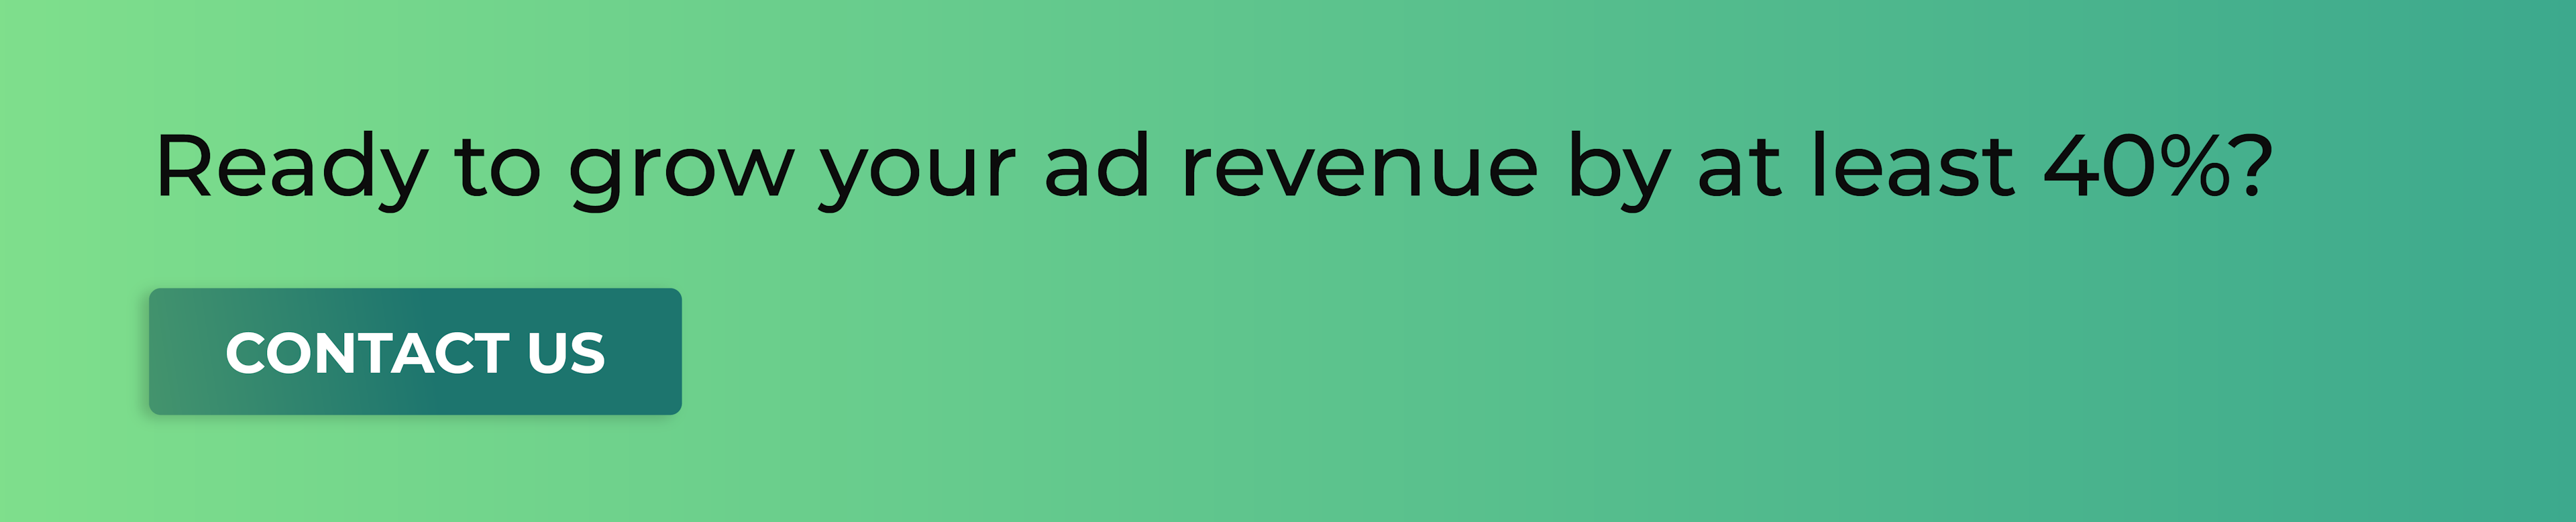 Ready to grow your ad revenue by at least 40%?